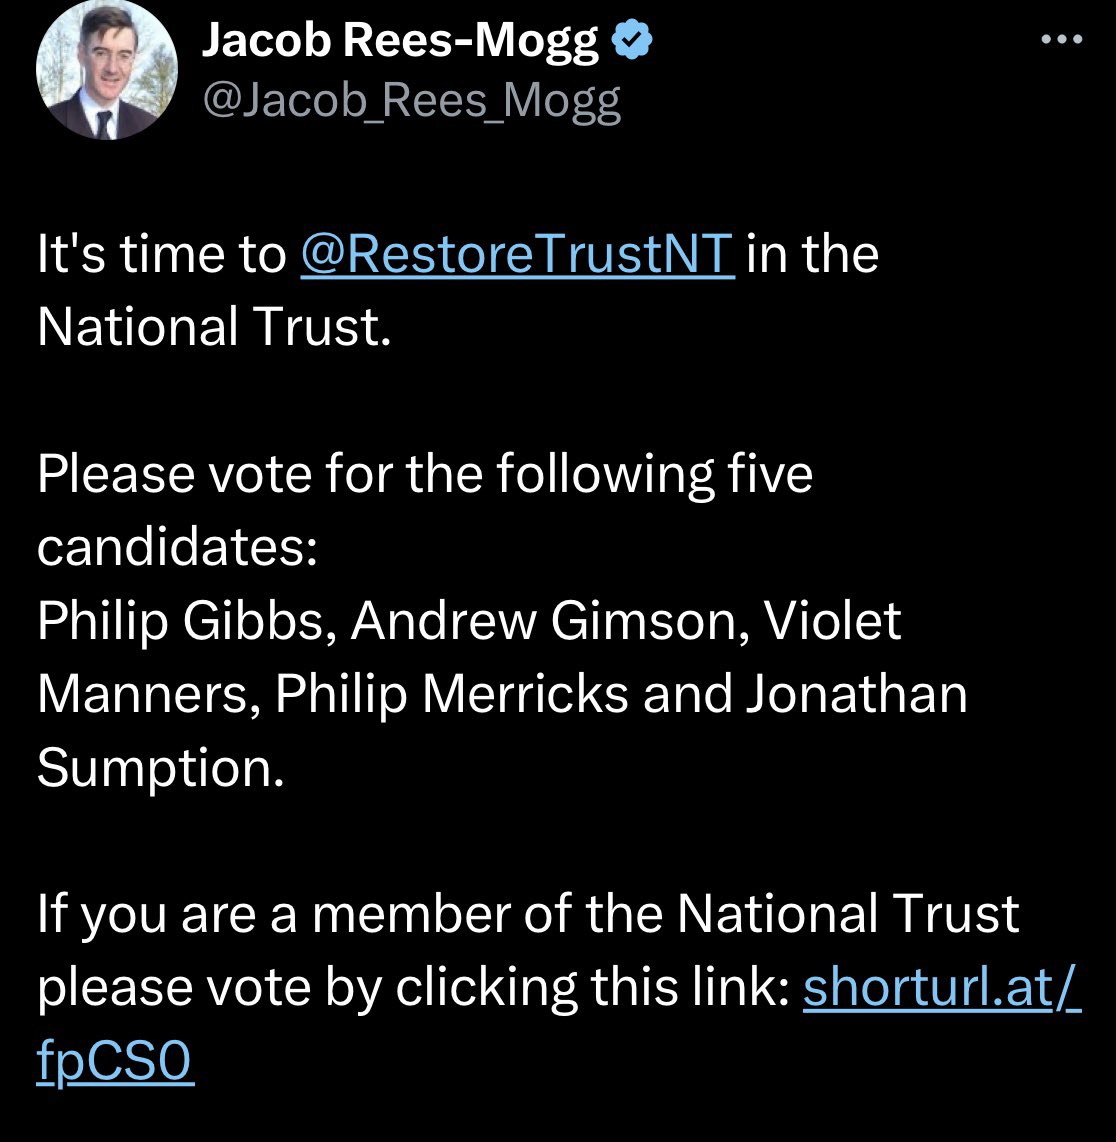 Moggy has helpfully listed the pro hunt candidates for the upcoming National Trust vote👇🏽

If you are a member please take this as a clear sign to avoid these people like the f*cking plague😷

Protecting our wildlife starts with your vote💪🏽

#WarOnWildlife 🦊🦌